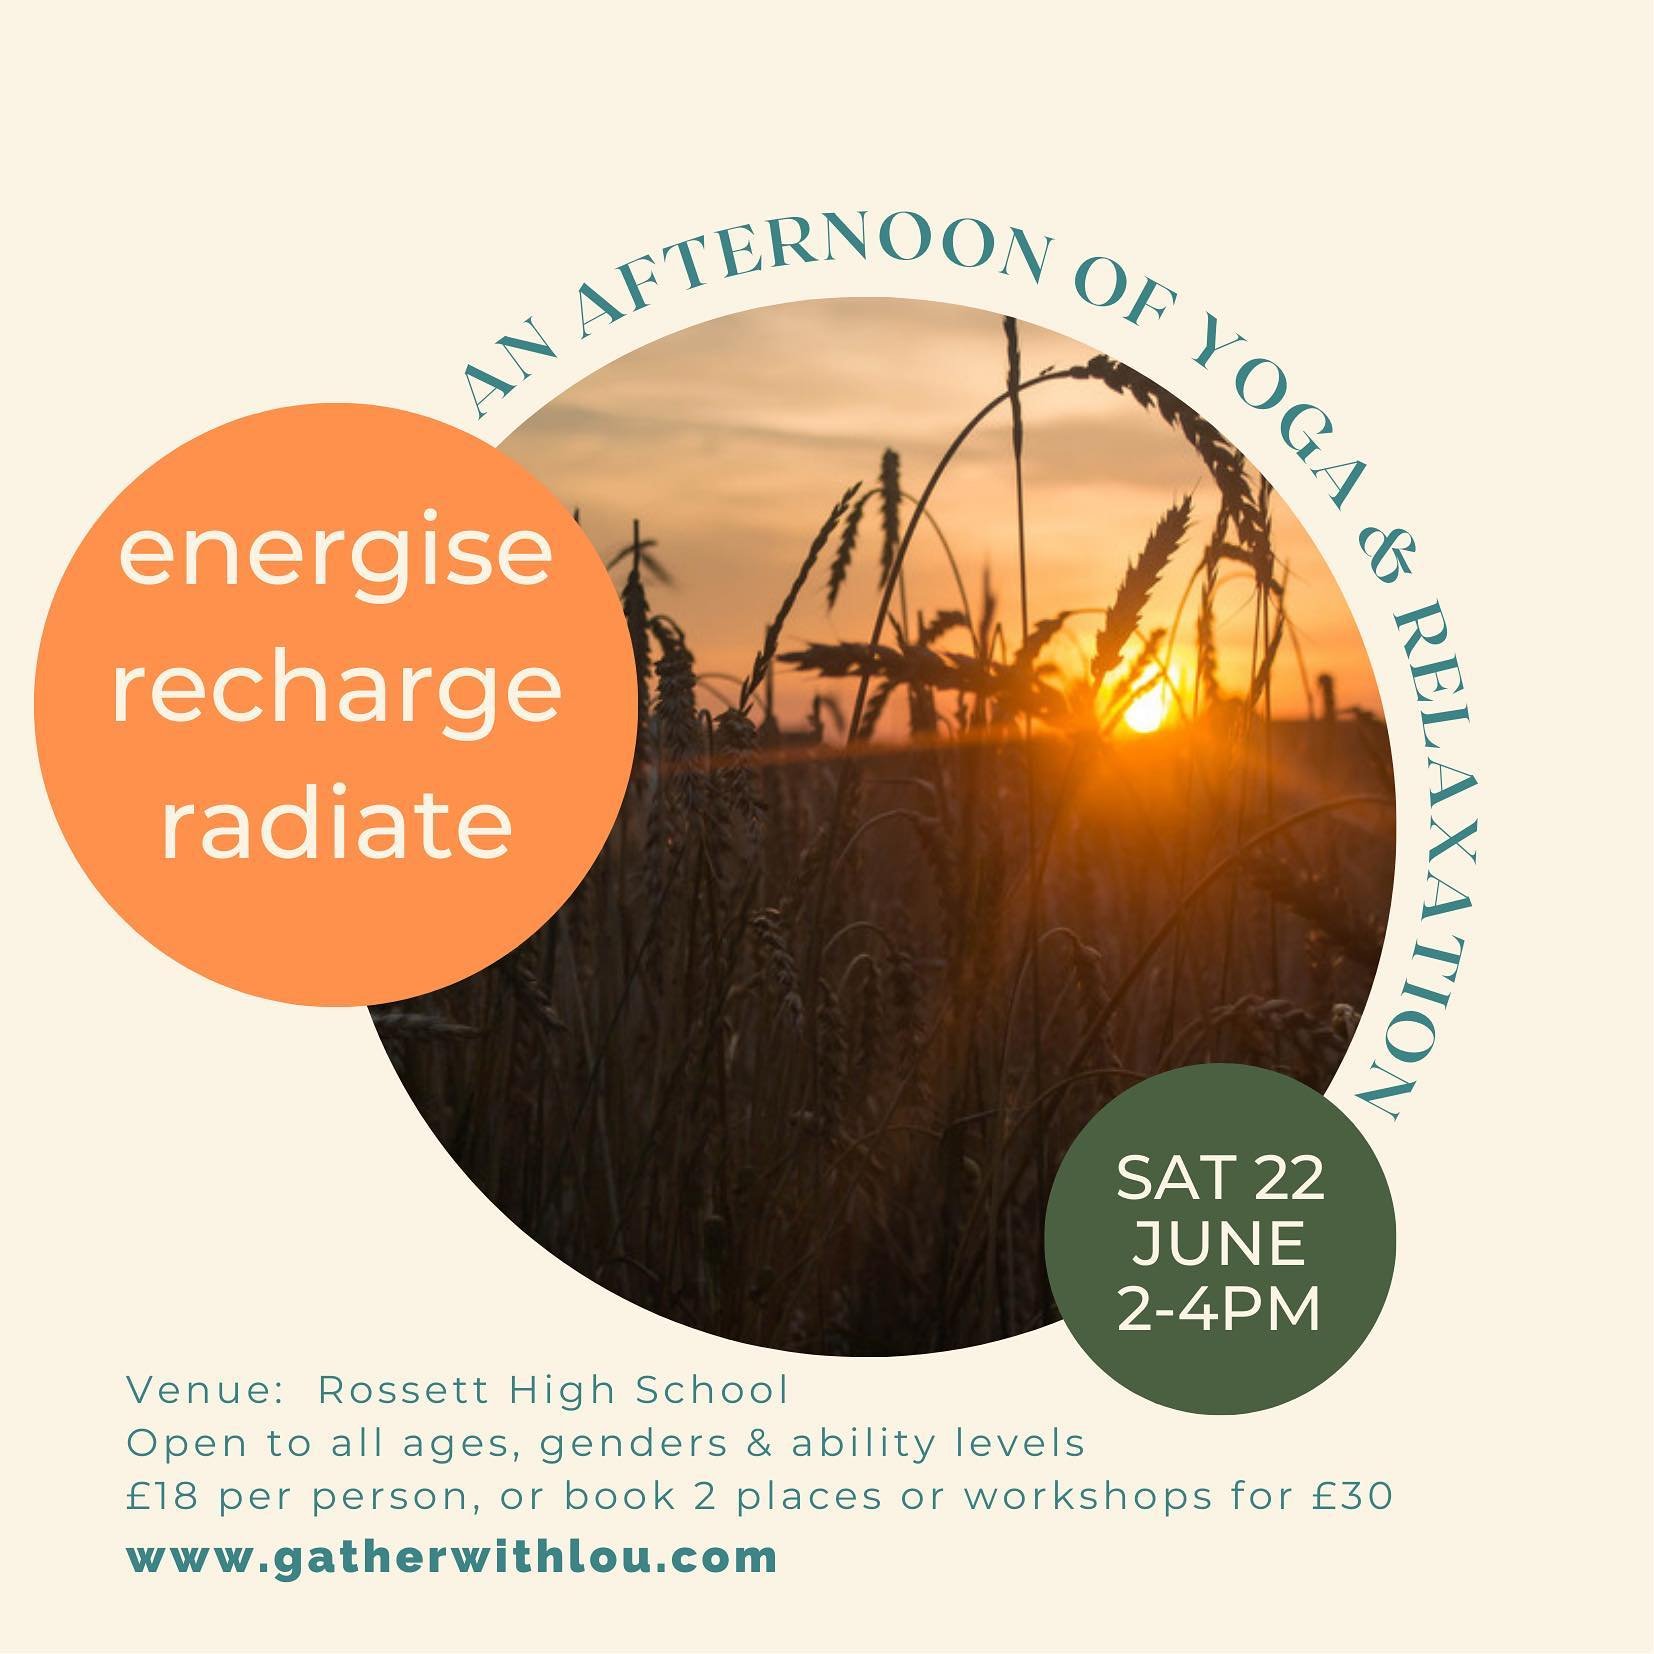 ☀️SUMMER SOLSTICE YOGA☀️
🌼Energise~Recharge~Radiate🌼

Saturday 22nd June ~ 2-4pm
Rossett High School (Green Lane entrance), Harrogate 

Join me for my upcoming afternoon of Yoga and Relaxation - an opportunity to enjoy a longer yoga experience (wit